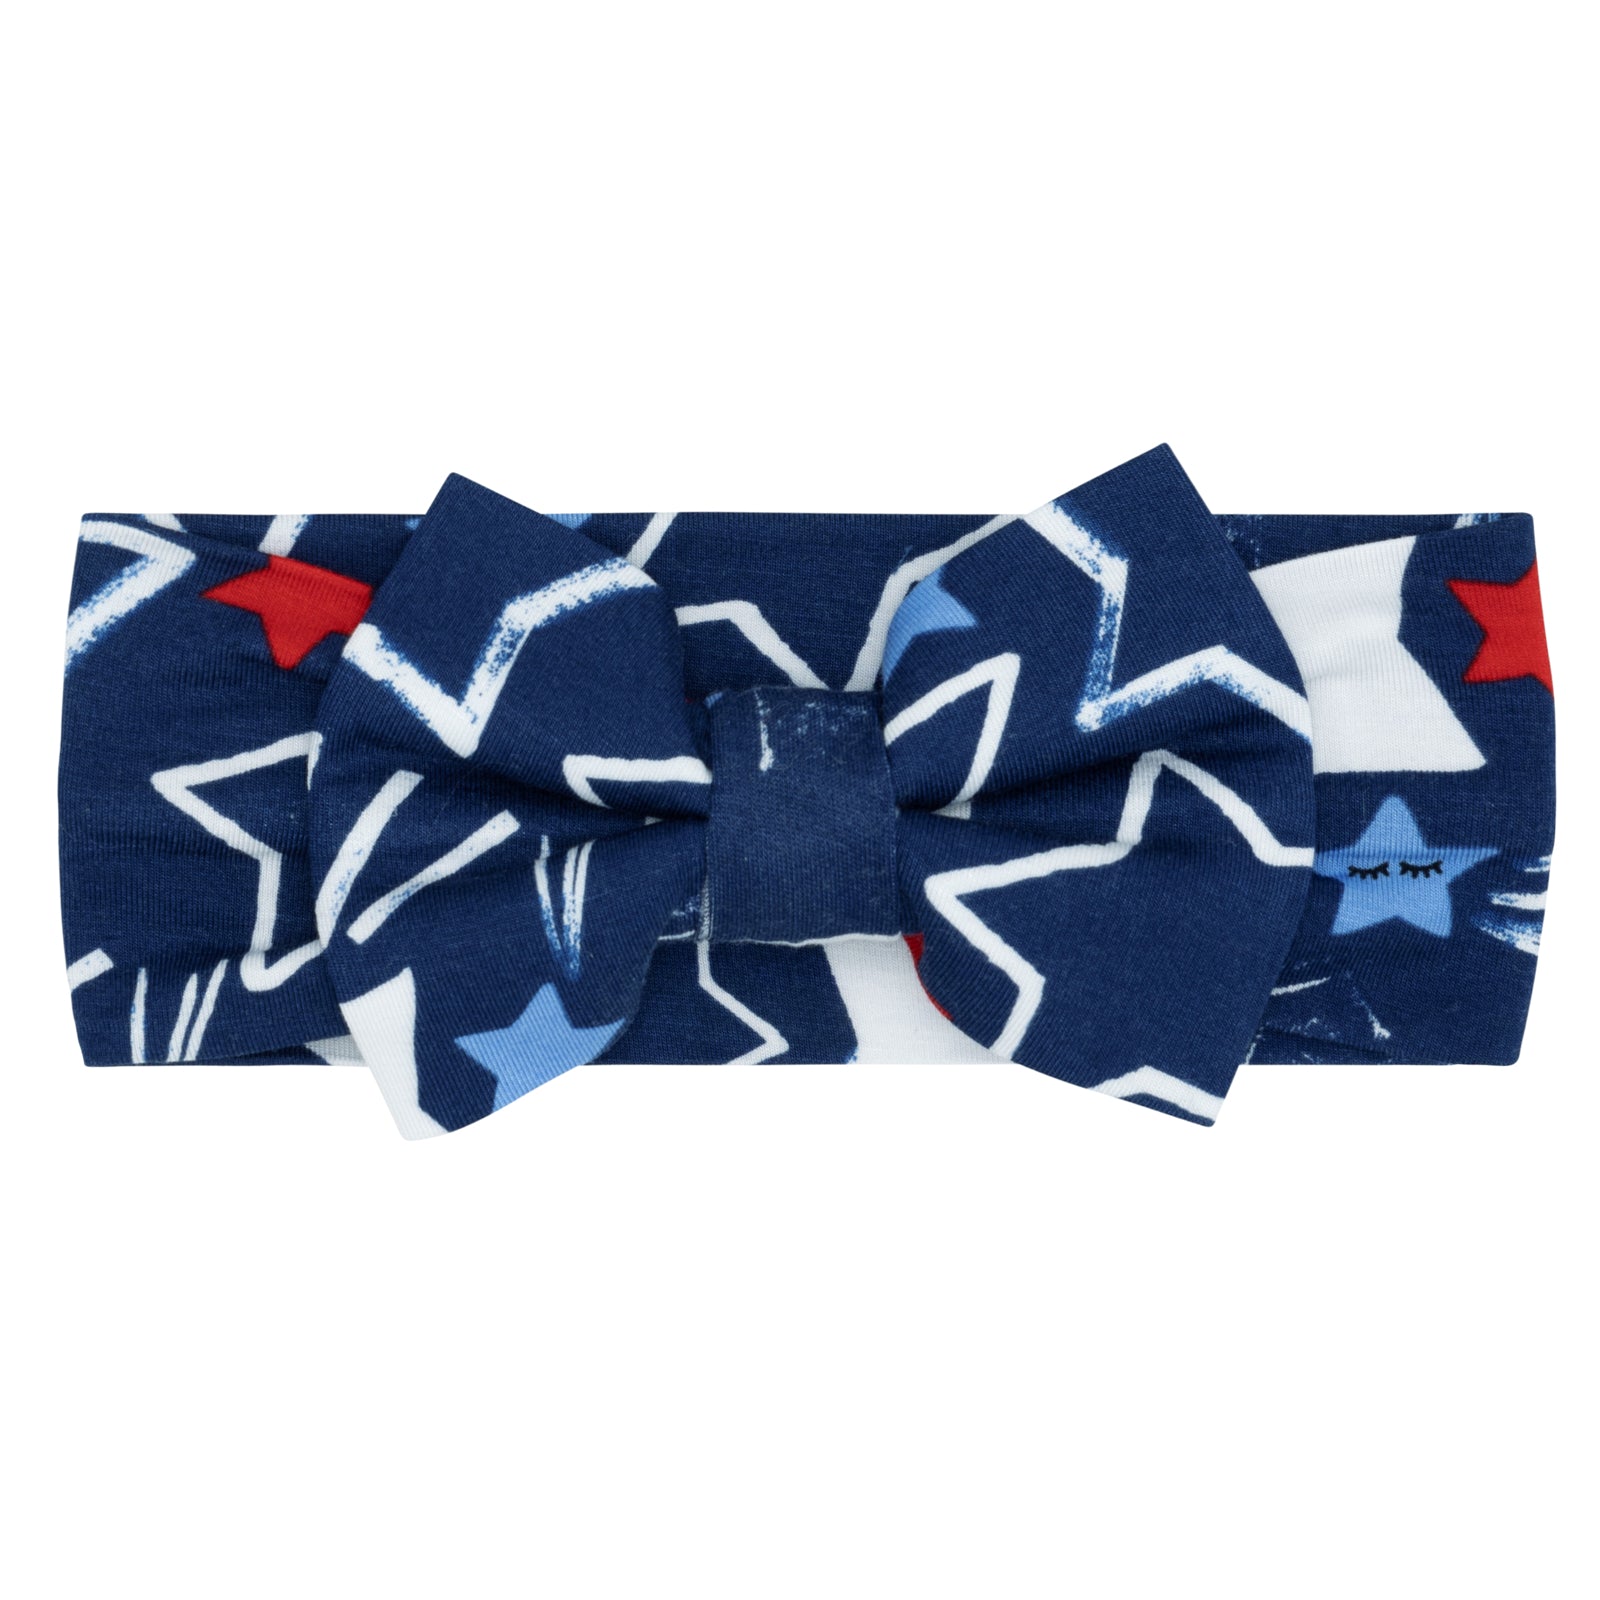 Flat lay image of a Star Spangled luxe bow headband